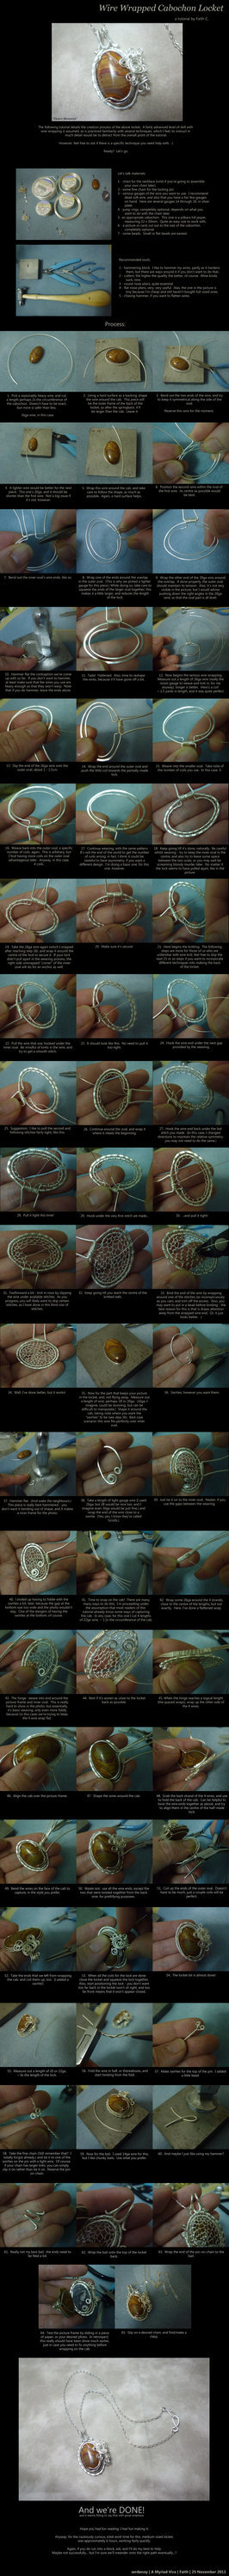 Wire Wrapped Cabochon Locket Tutorial by AMyriadVice on deviantART